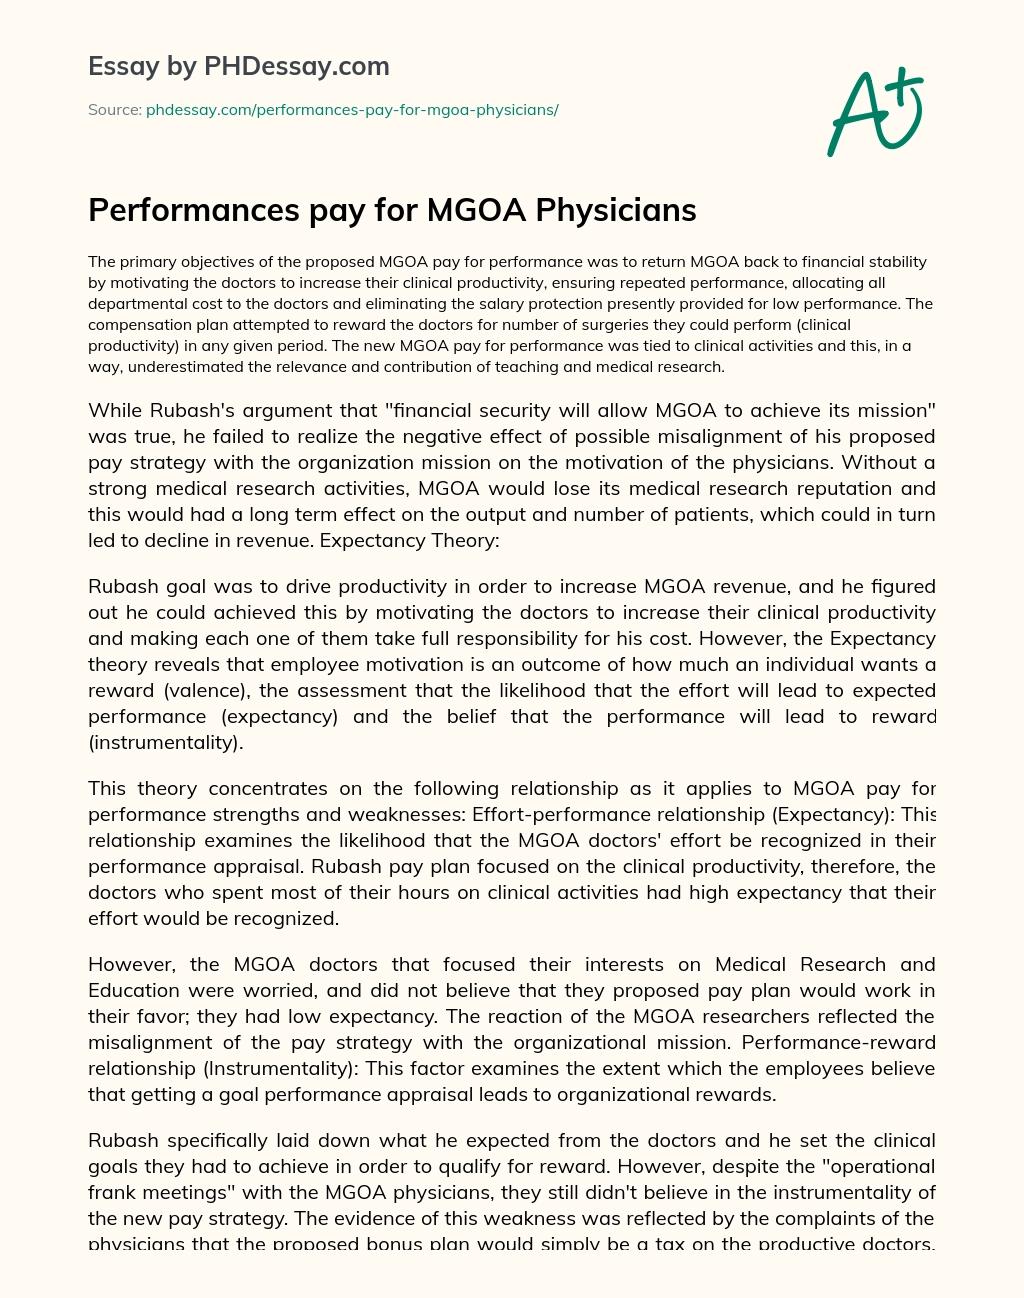 Performances pay for MGOA Physicians essay